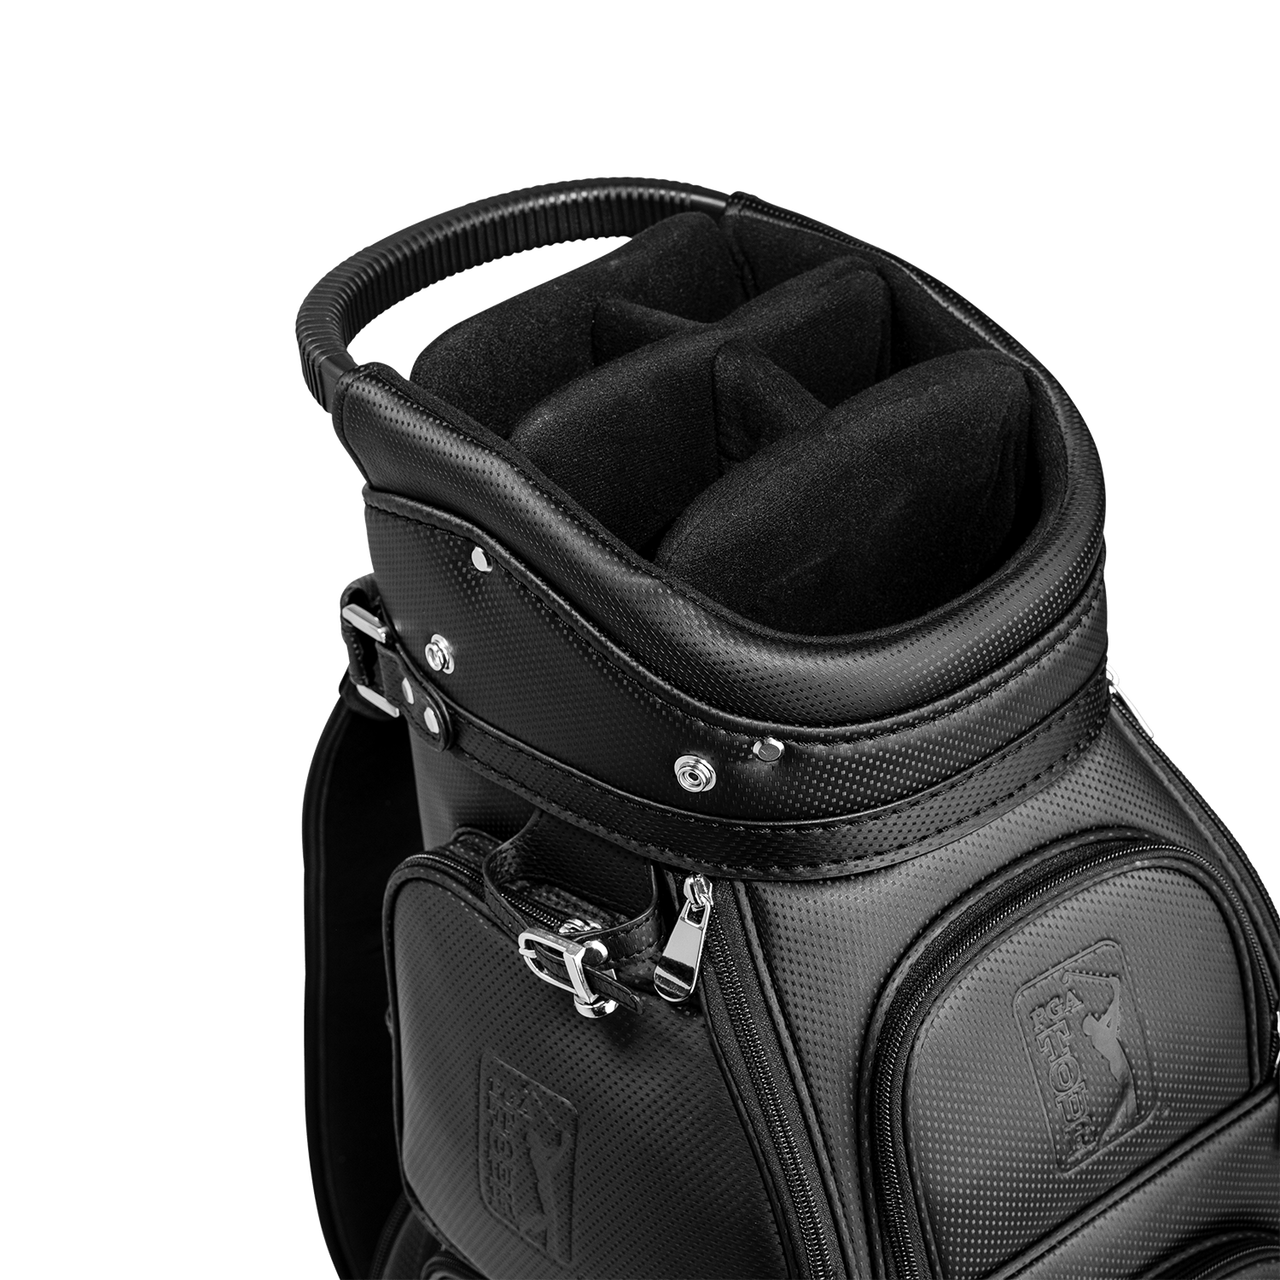 PGA Tour Golf Bag Black with Travel Cover and Shark Wheels